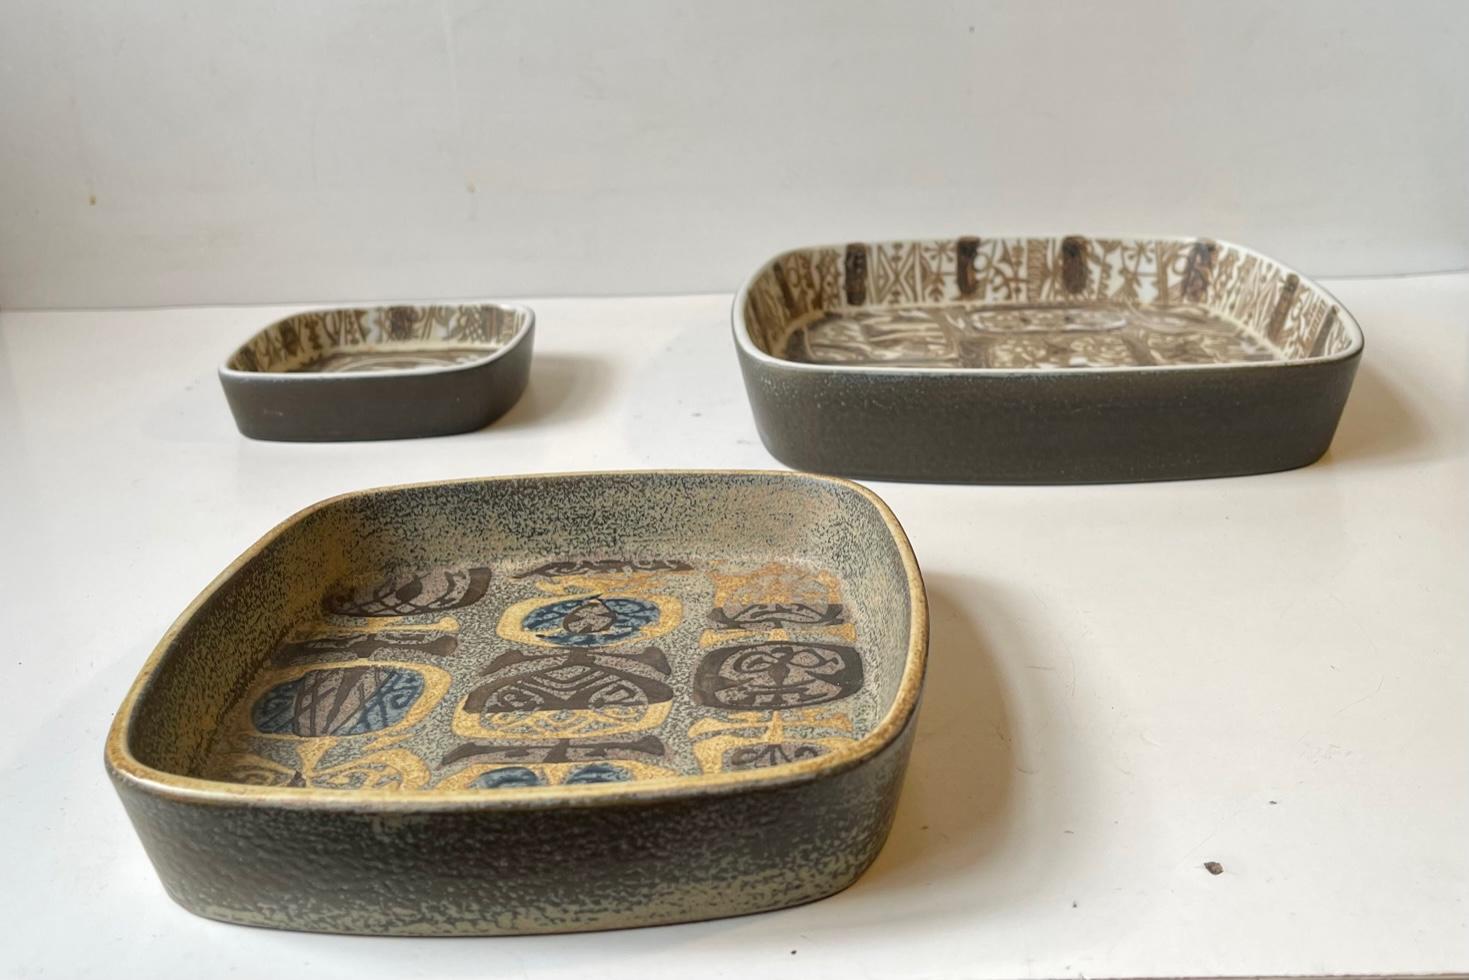 Royal Copenhagen ceramic Baca trays/dishes/small bowls designed by Nils Thorsson. Decorated in earthy glazes with an abstract motifs. All of them fully marked to the base with designer initials and makers mark. Measurements: W: 22.5/17/11 cm, H: